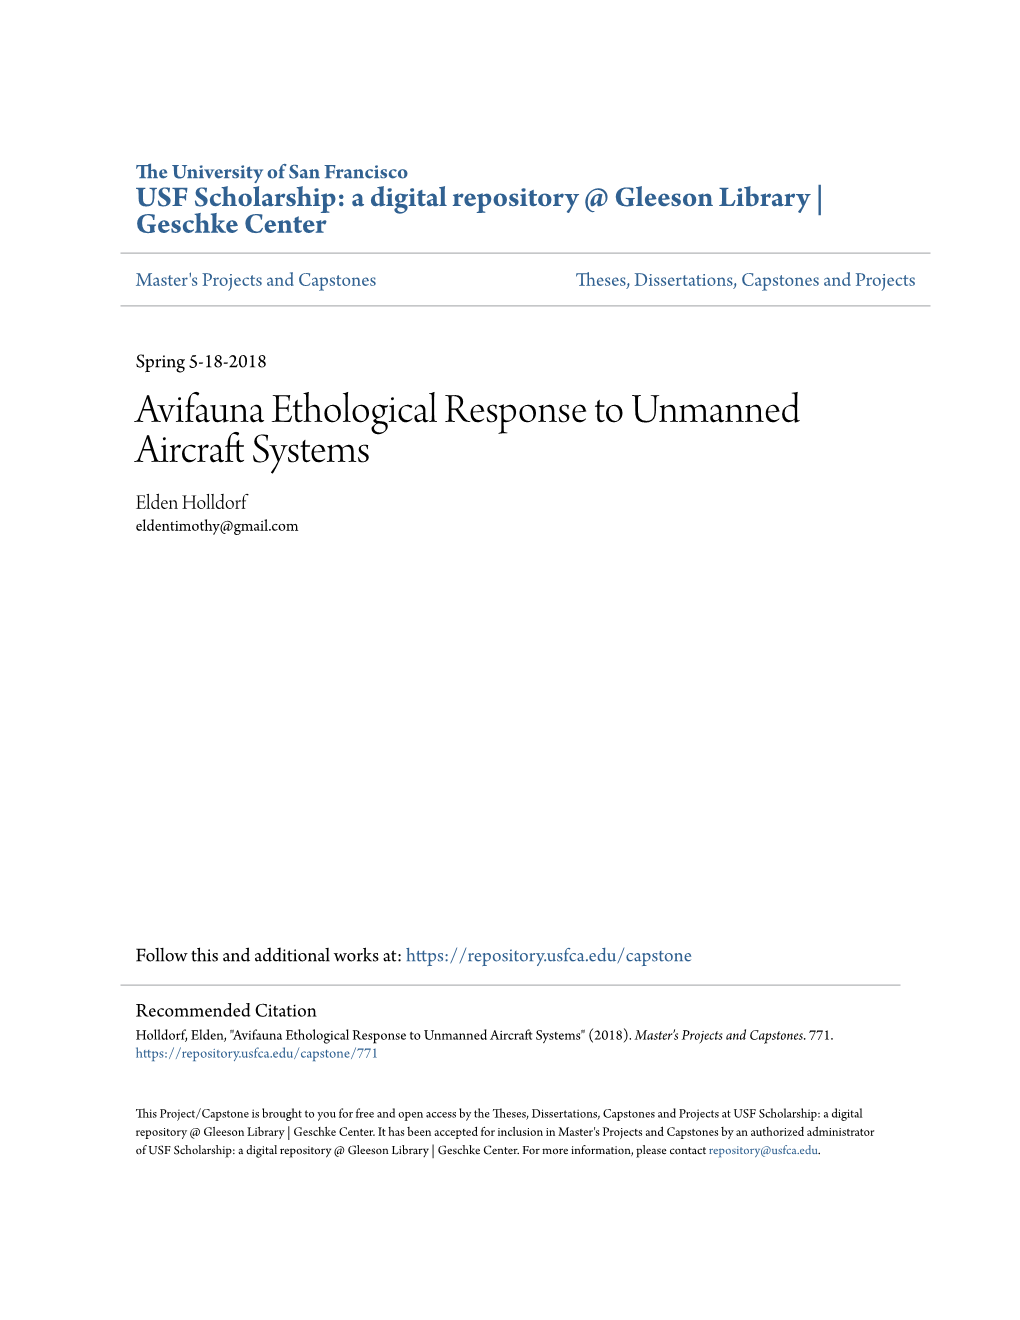 Avifauna Ethological Response to Unmanned Aircraft Systems